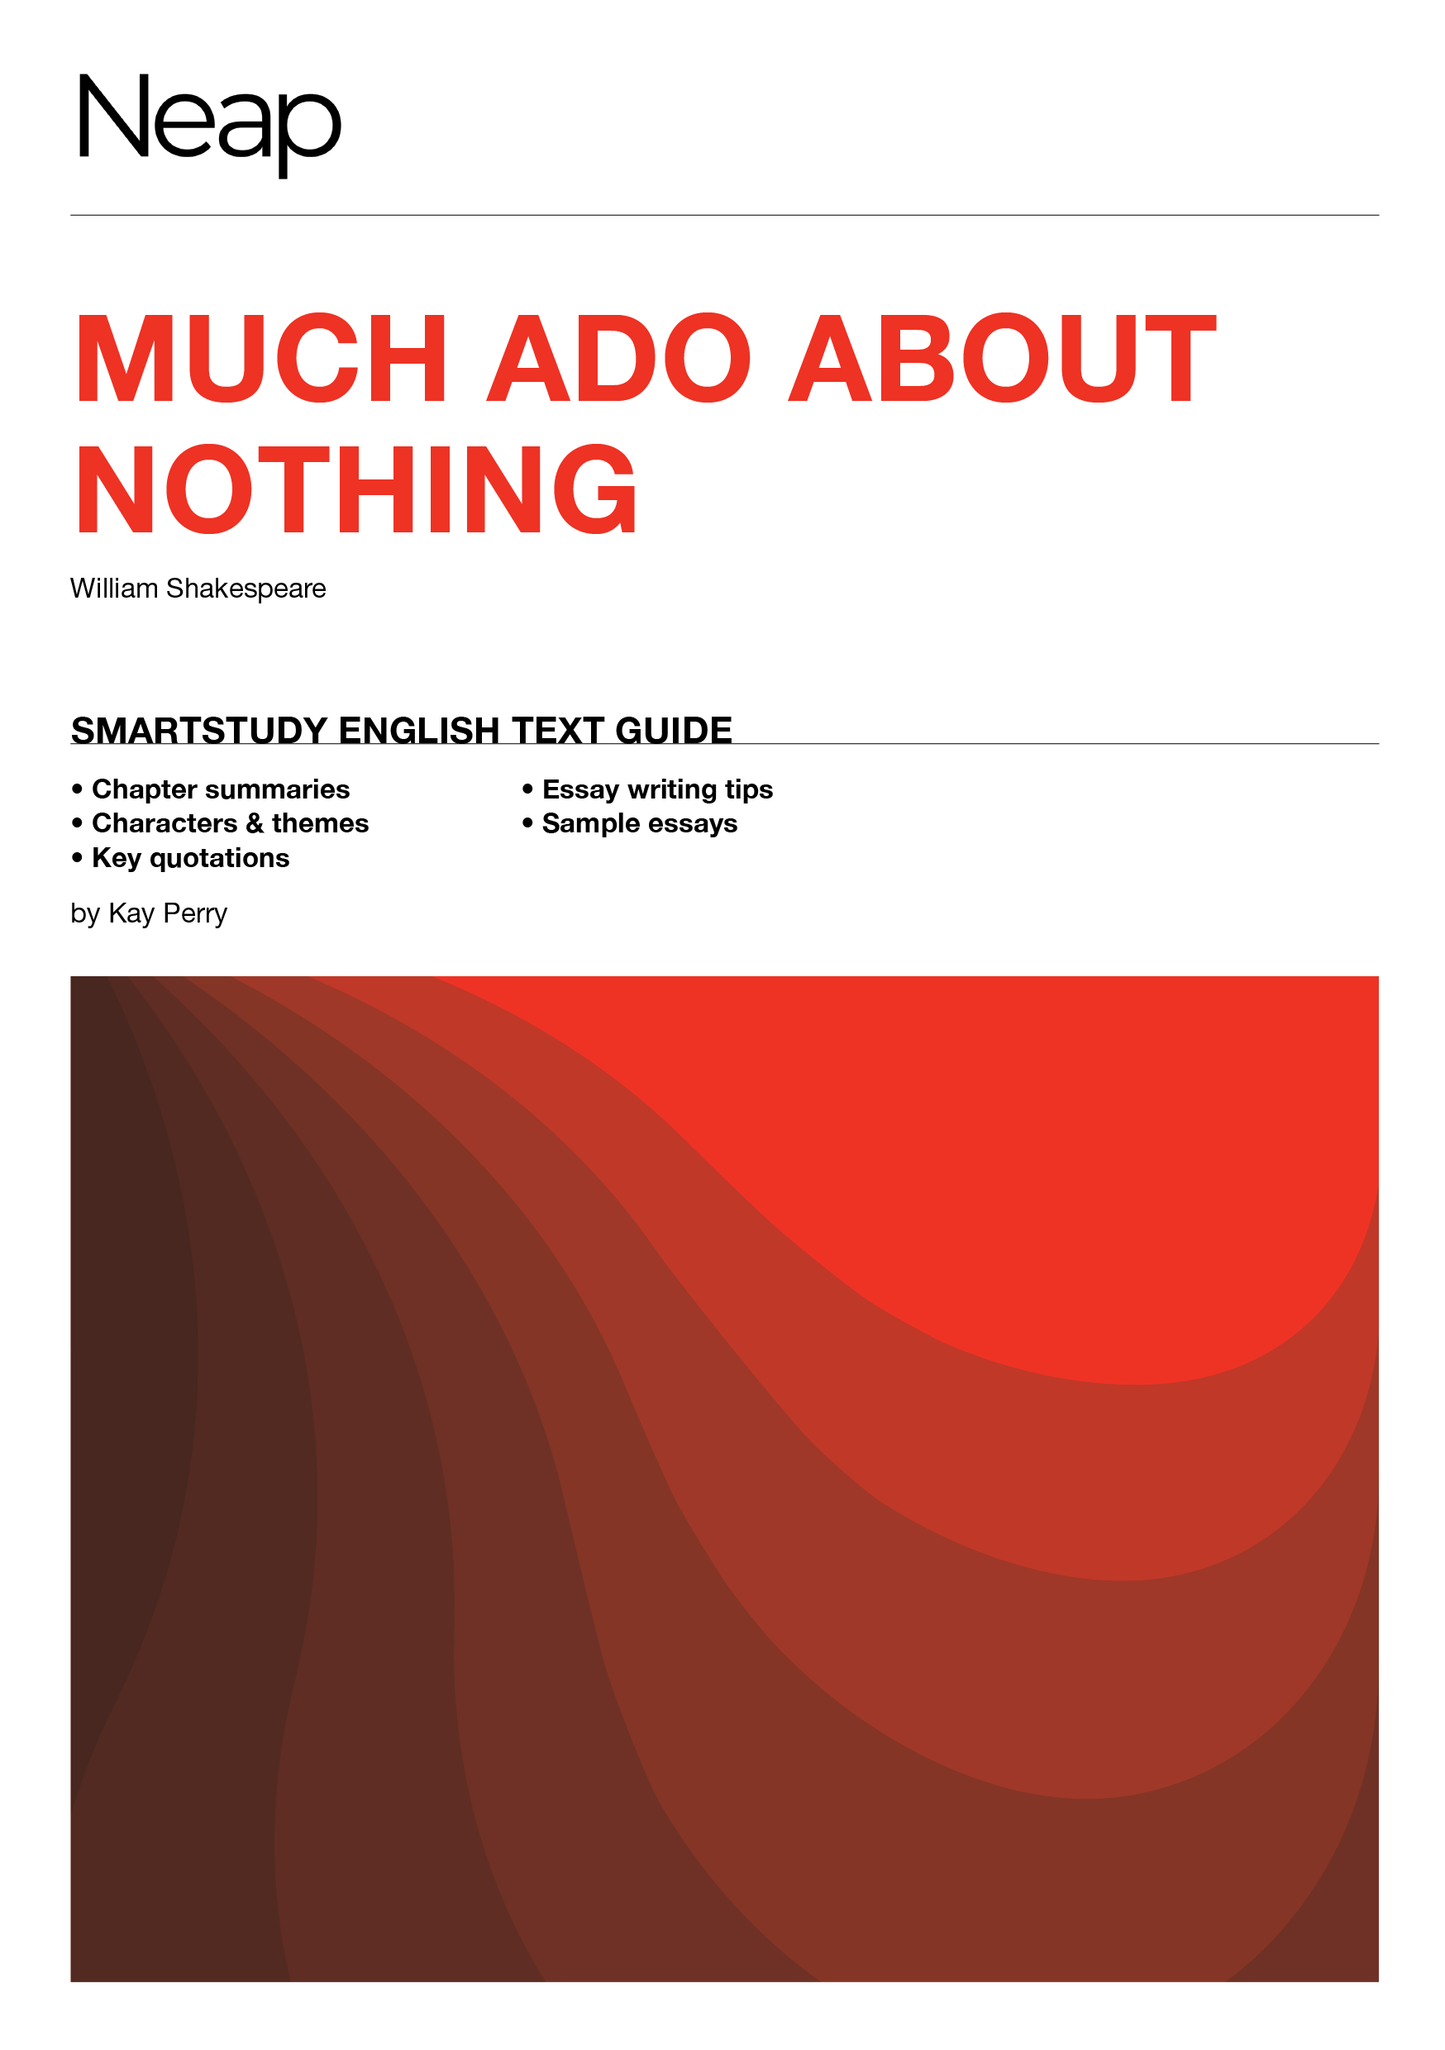 The NEAP Much Ado About Nothing smartstudy Text Guide